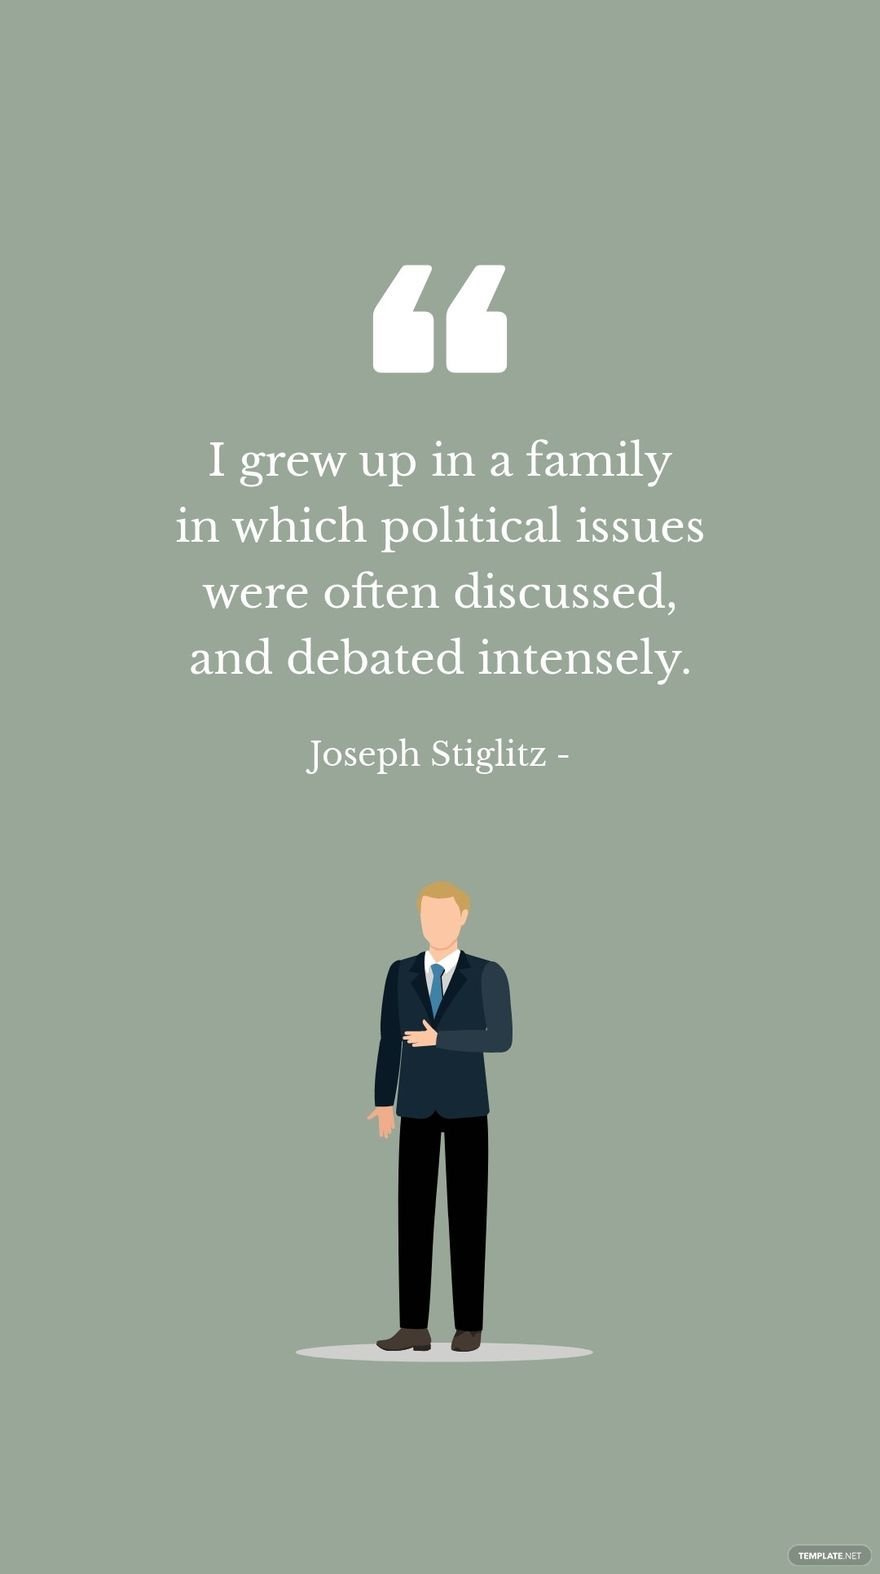 Free Joseph Stiglitz - I grew up in a family in which political issues were often discussed, and debated intensely.